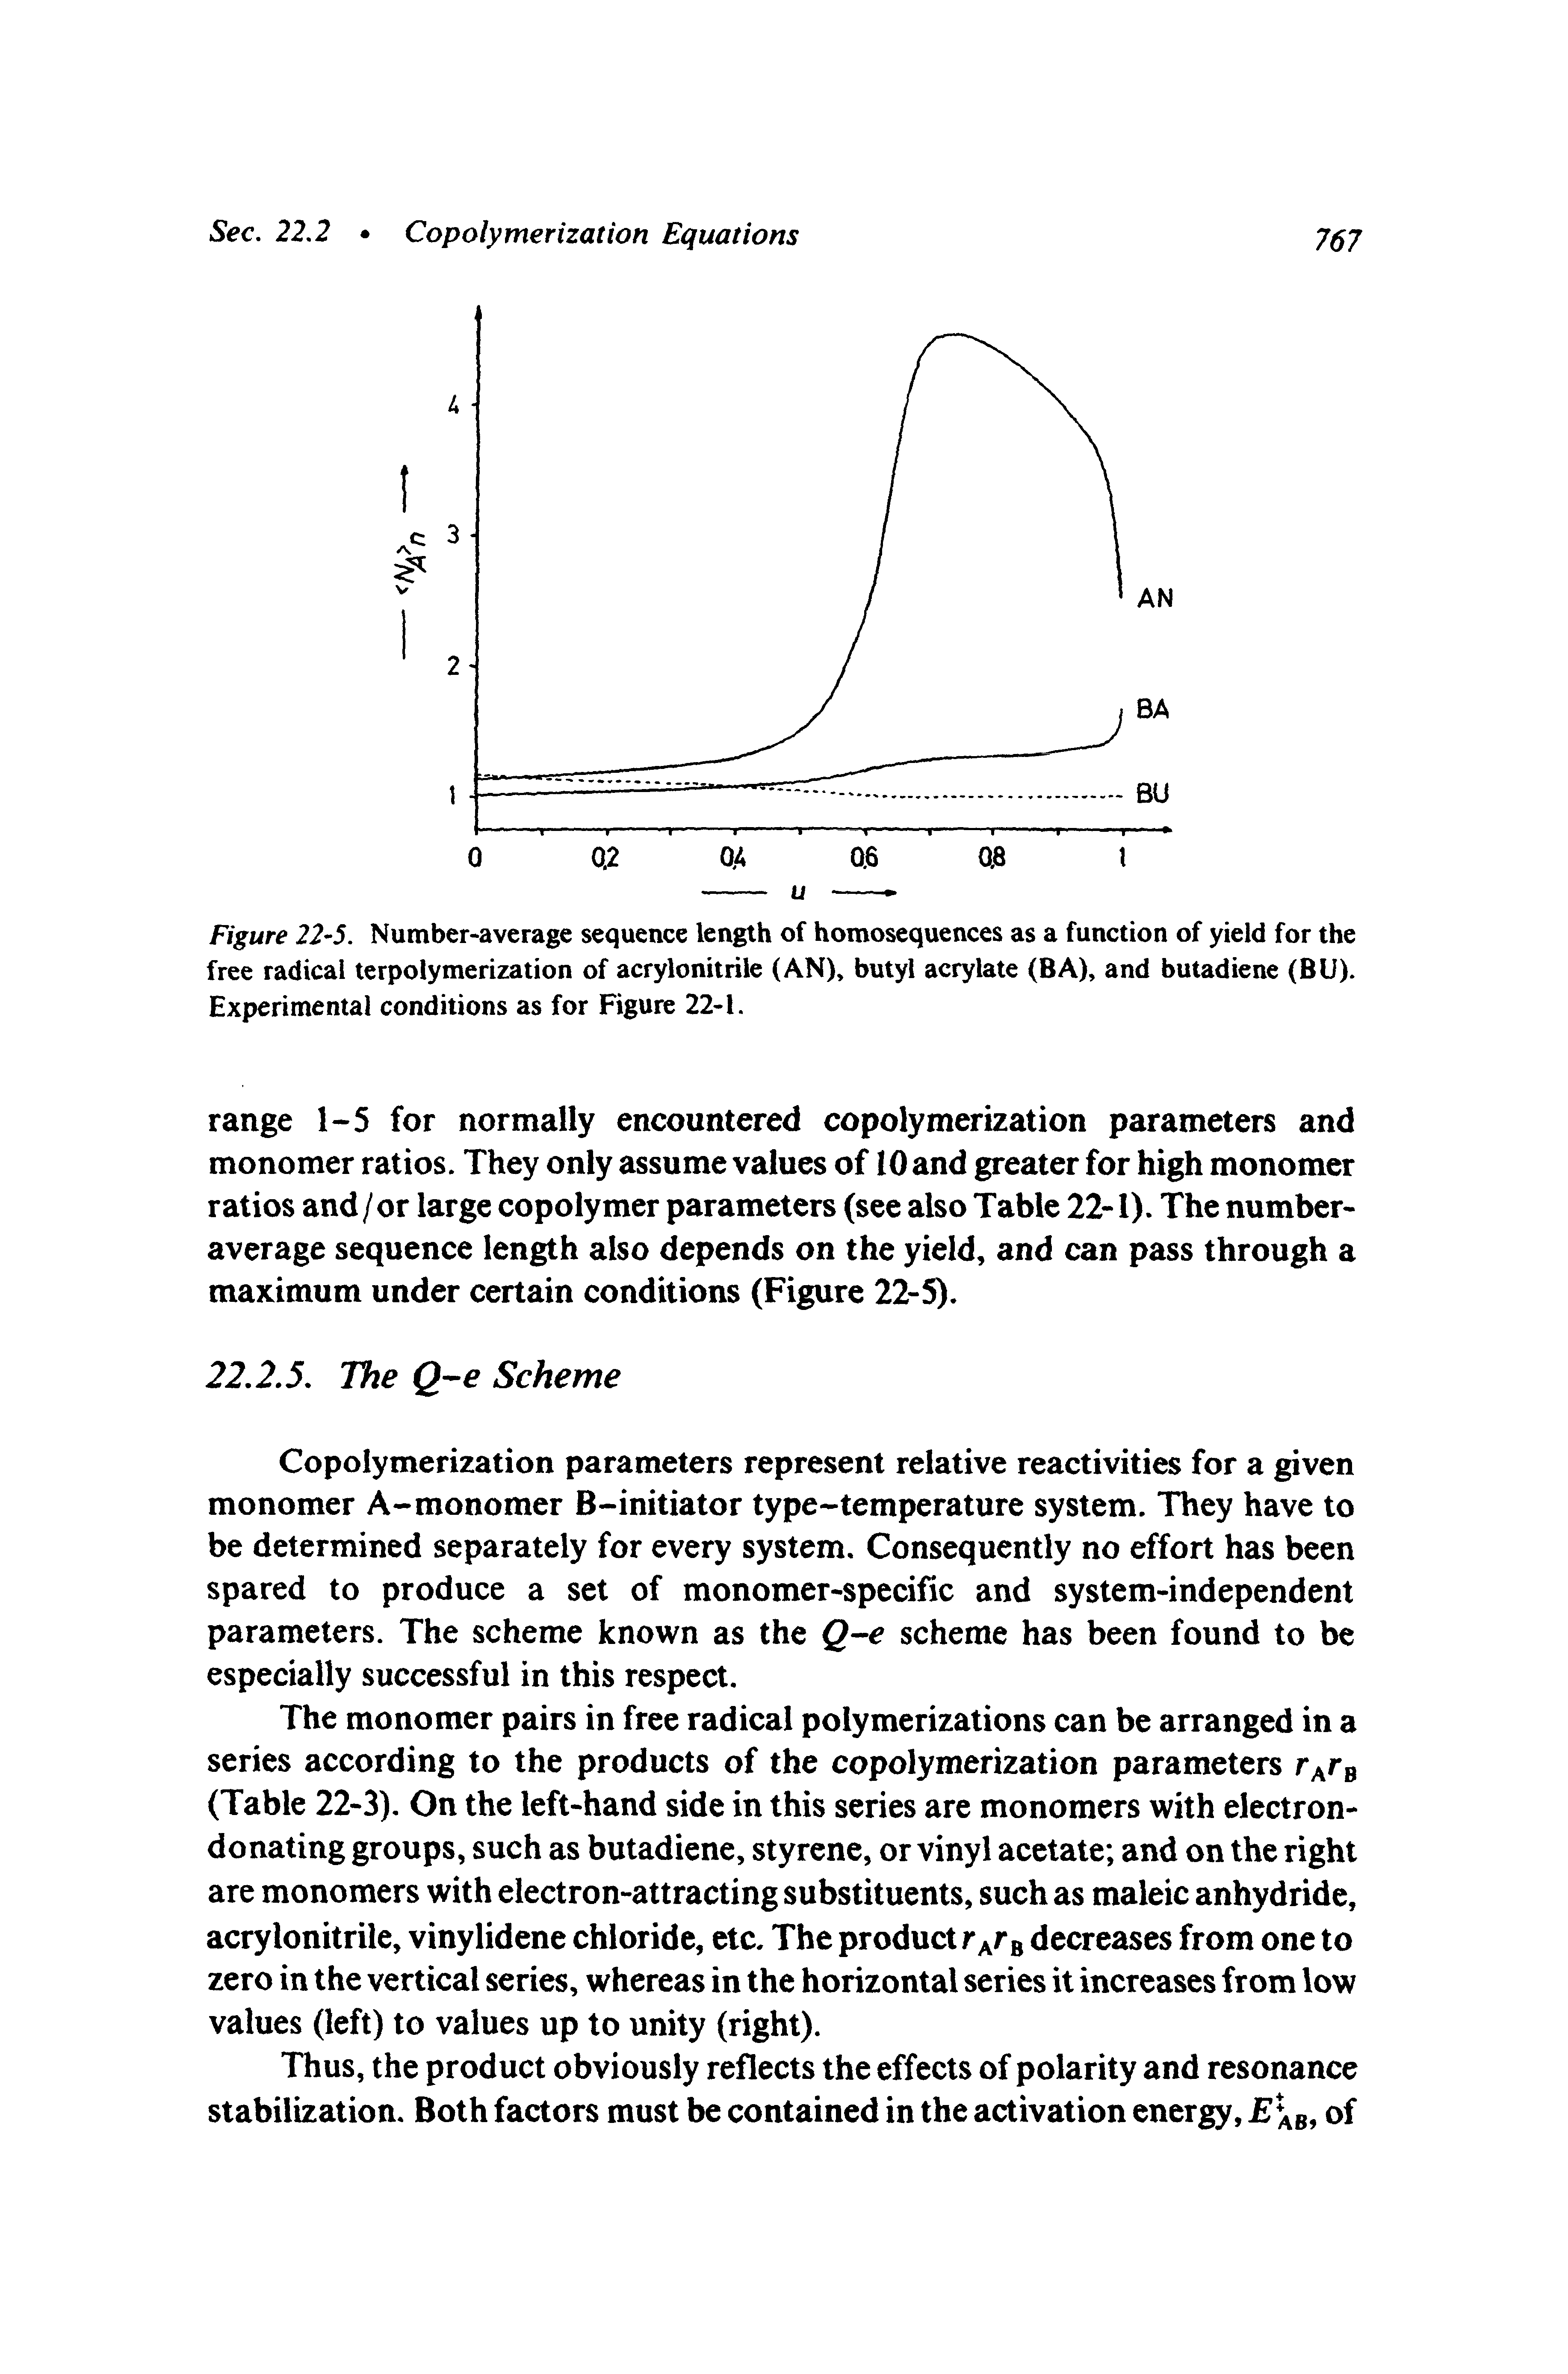 Figure 22-5. Number-average sequence length of homosequences as a function of yield for the free radical terpolymerization of acrylonitrile (AN) butyl acrylate (BA), and butadiene (BU). Experimental conditions as for Figure 22-1.